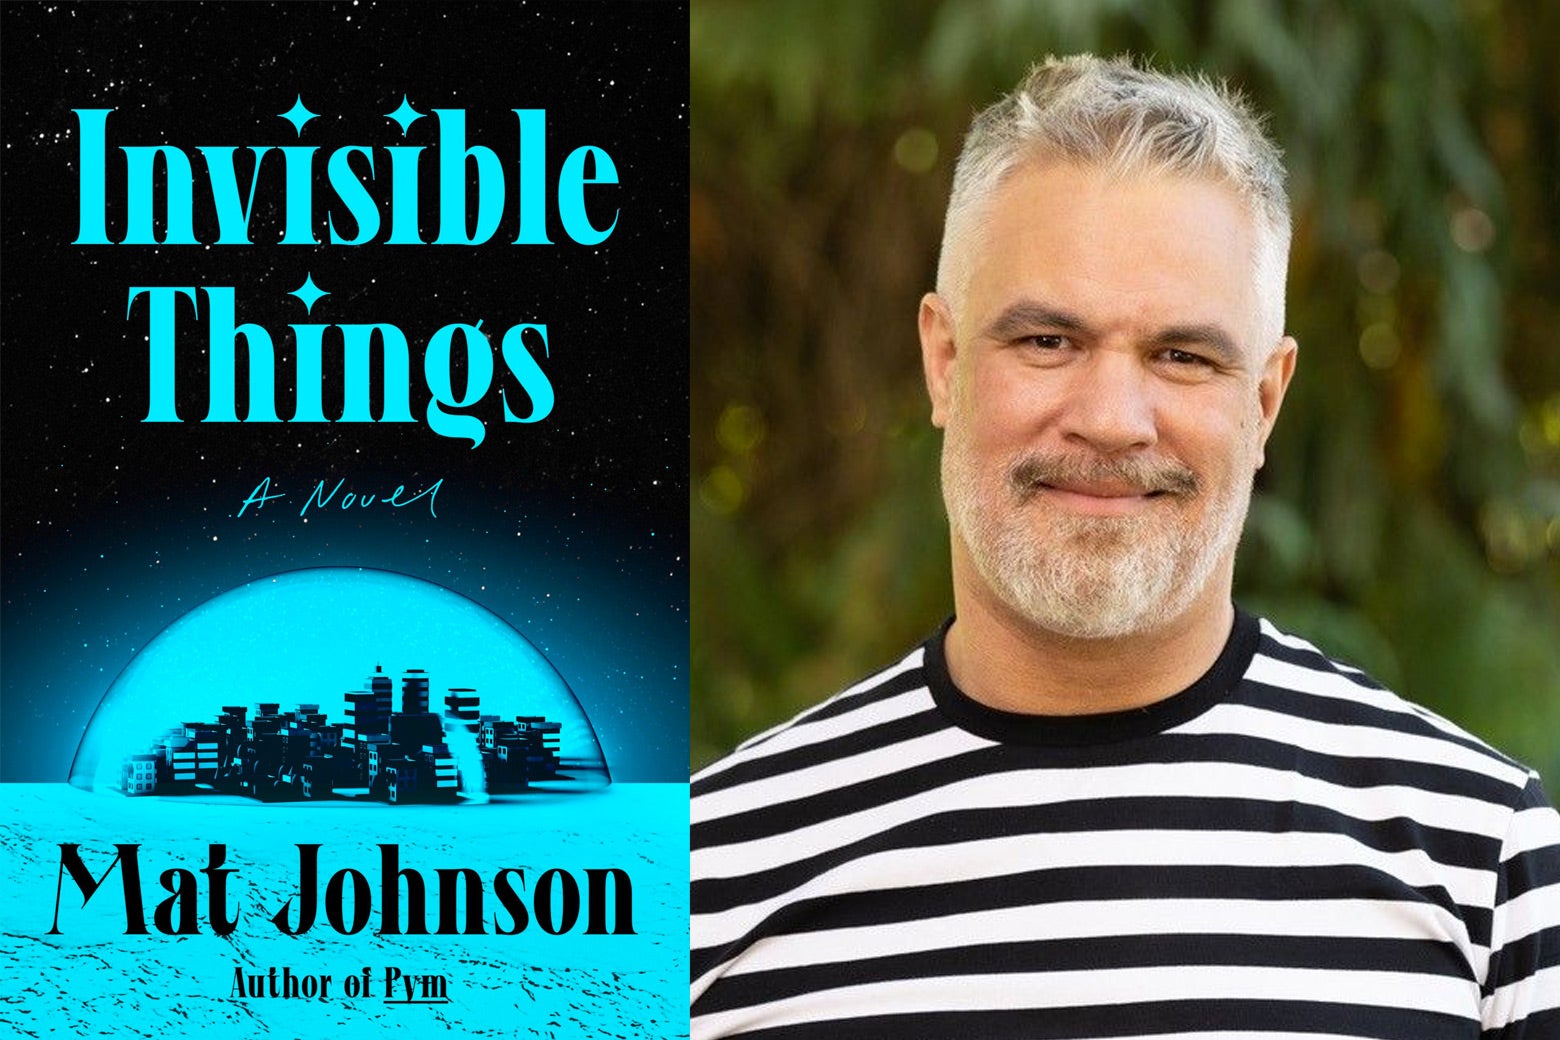 The cover of Mat Johnson's book, Invisible Things.